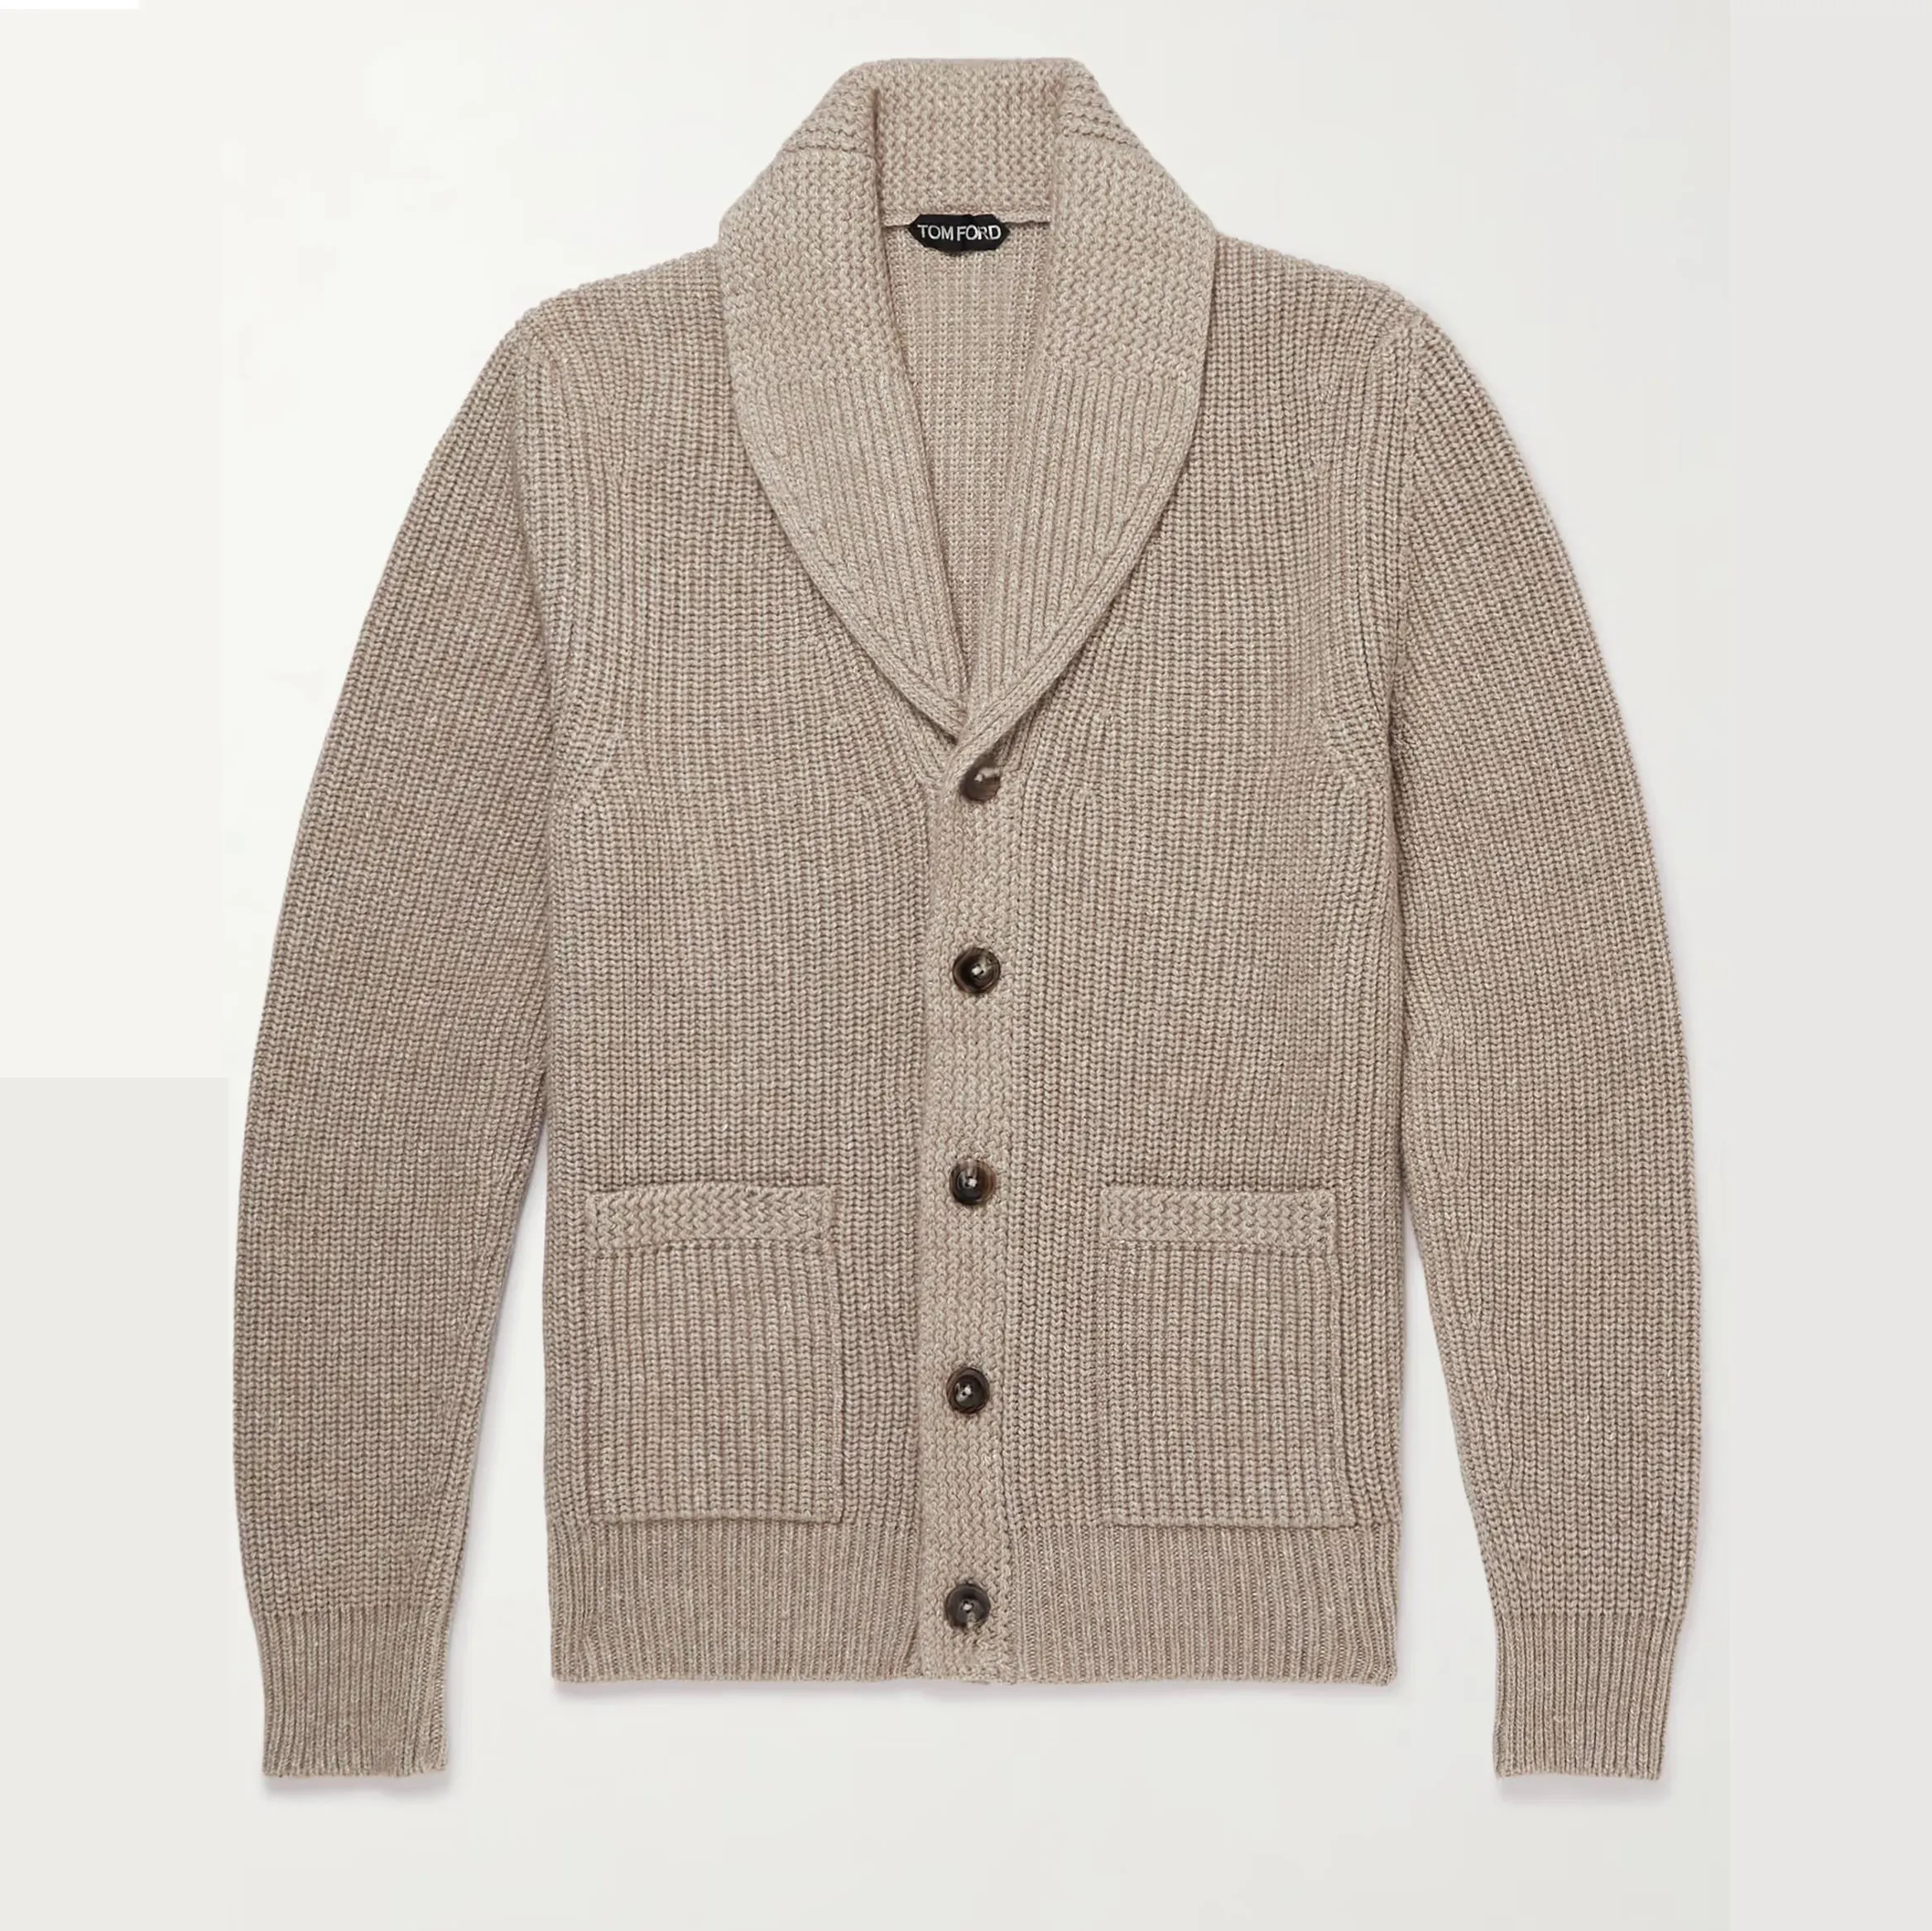 ODM winter thick men cardigan sweater with button knitted shawl collar cashmere cardigan men